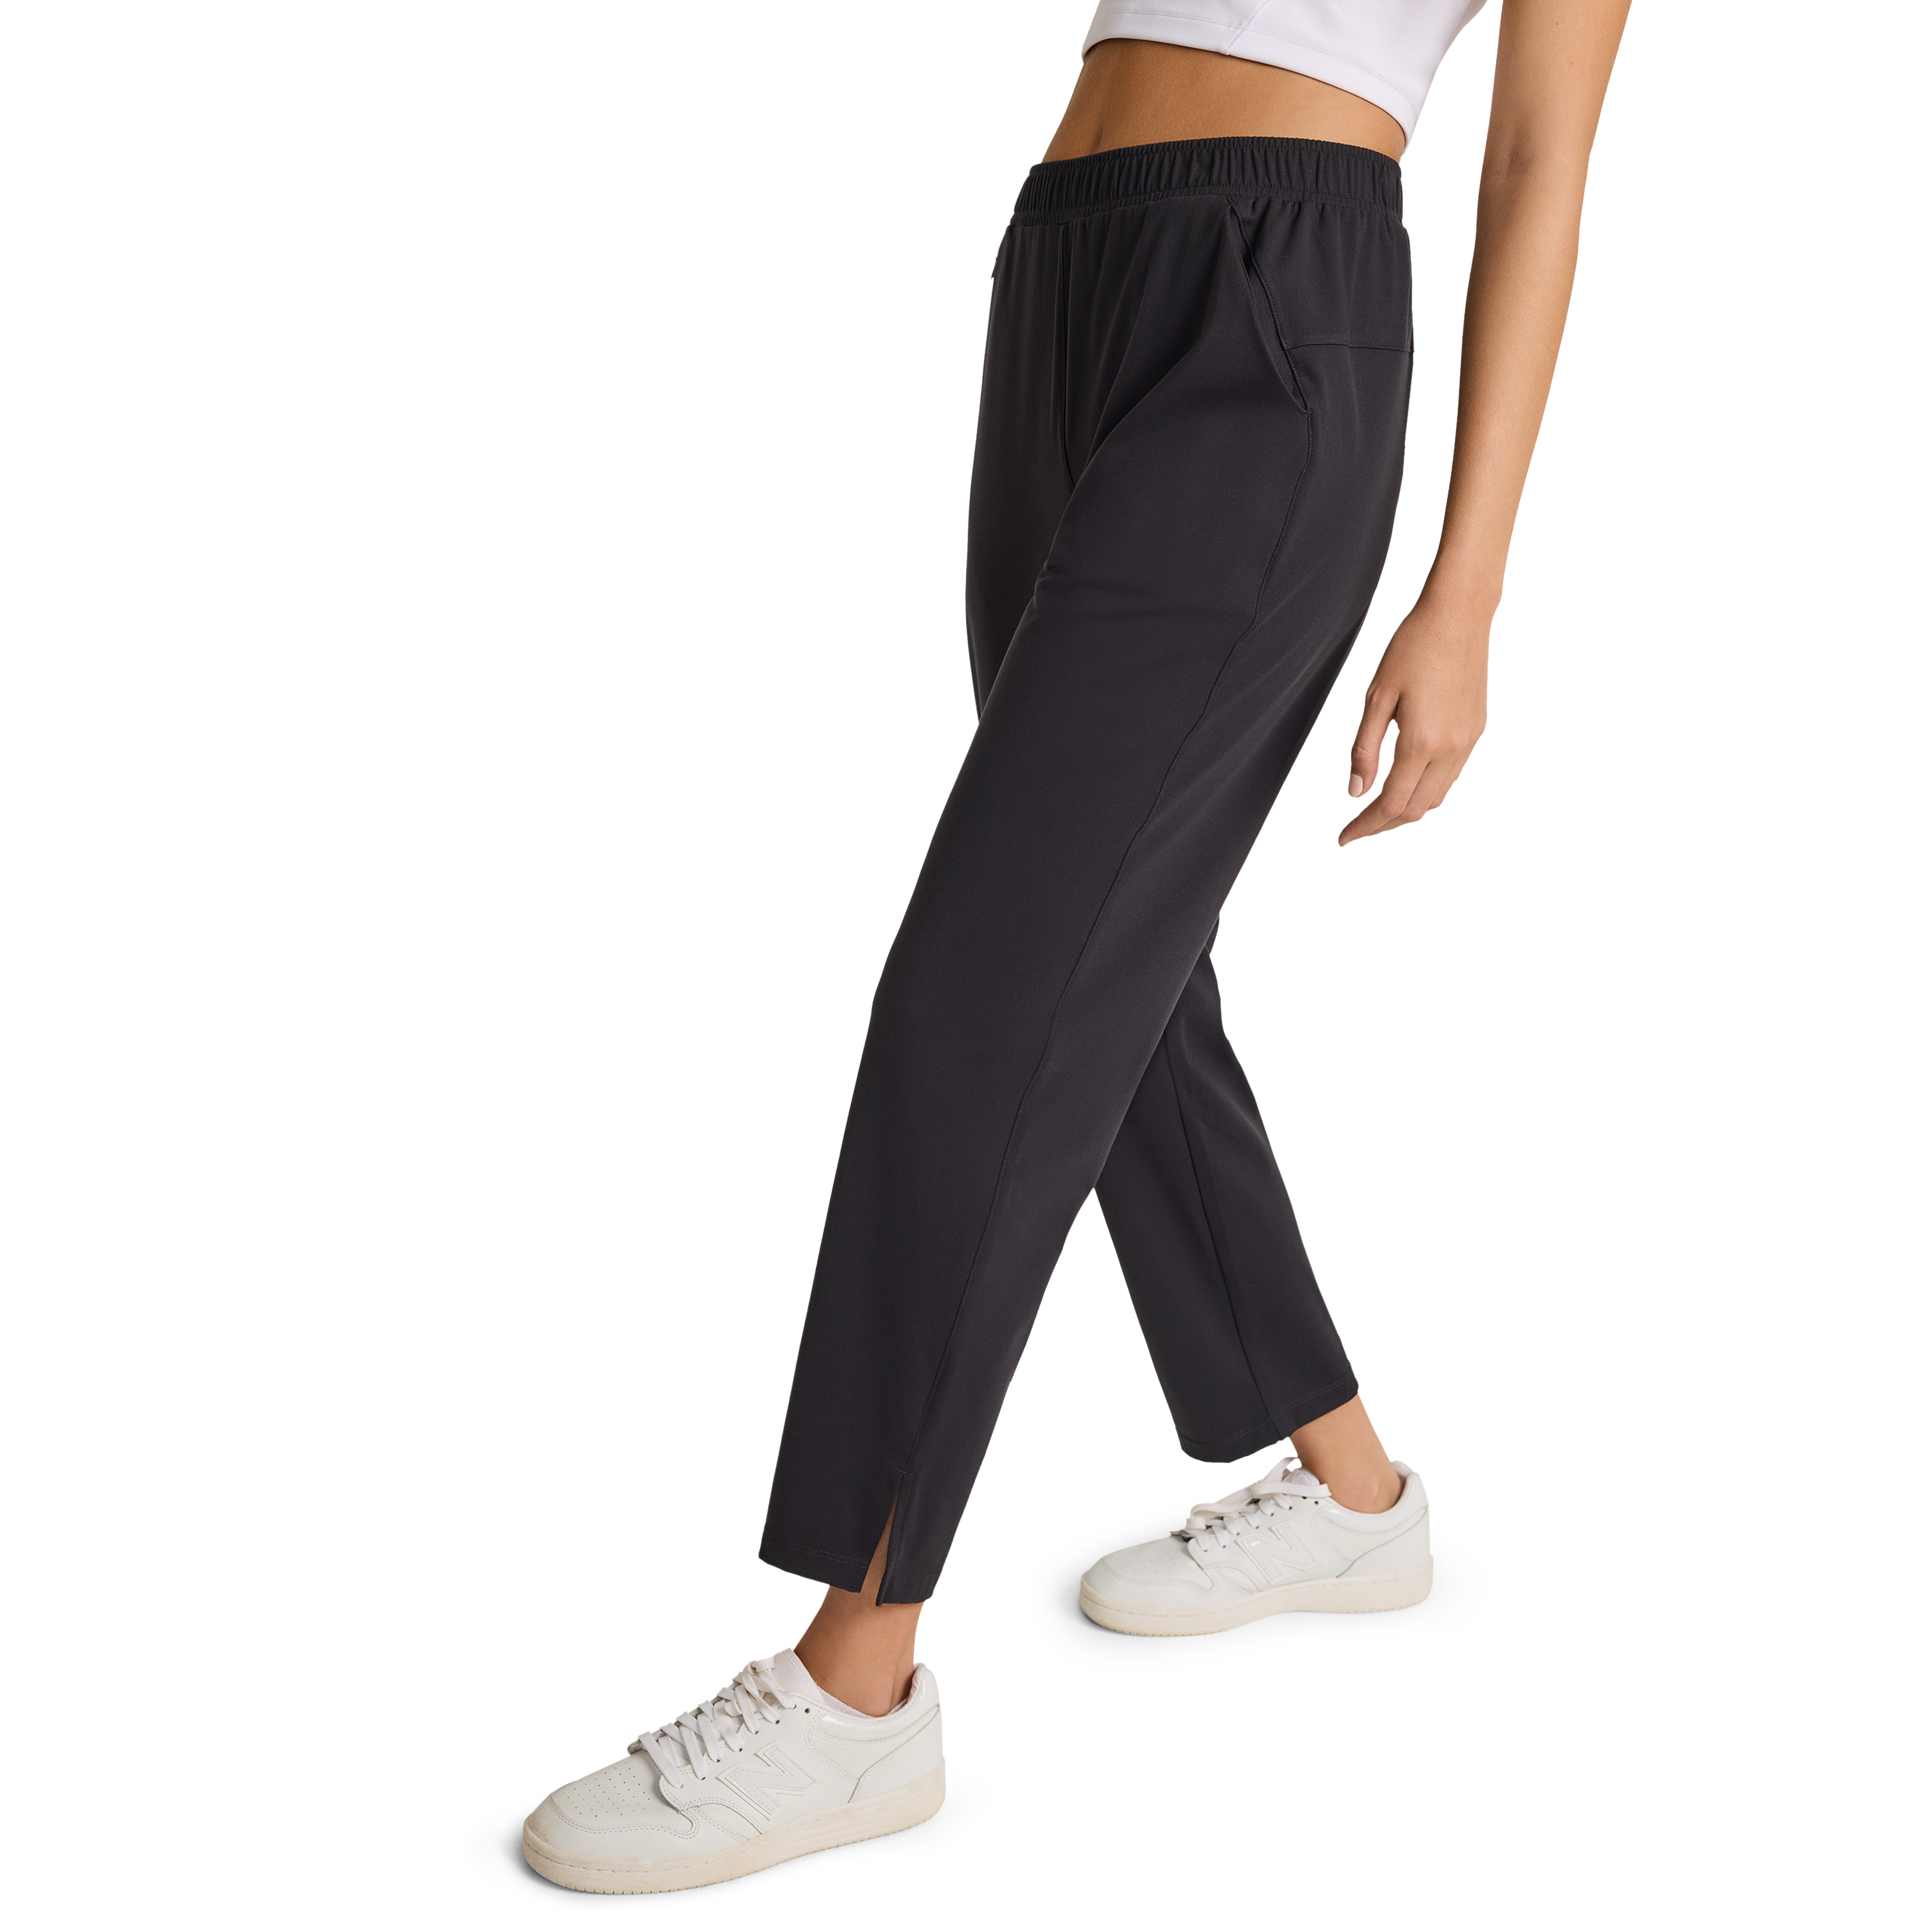 Buy CRZ YOGA Womens 4-Way Stretch Travel Casual 7/8 Ankle Pants 27.5